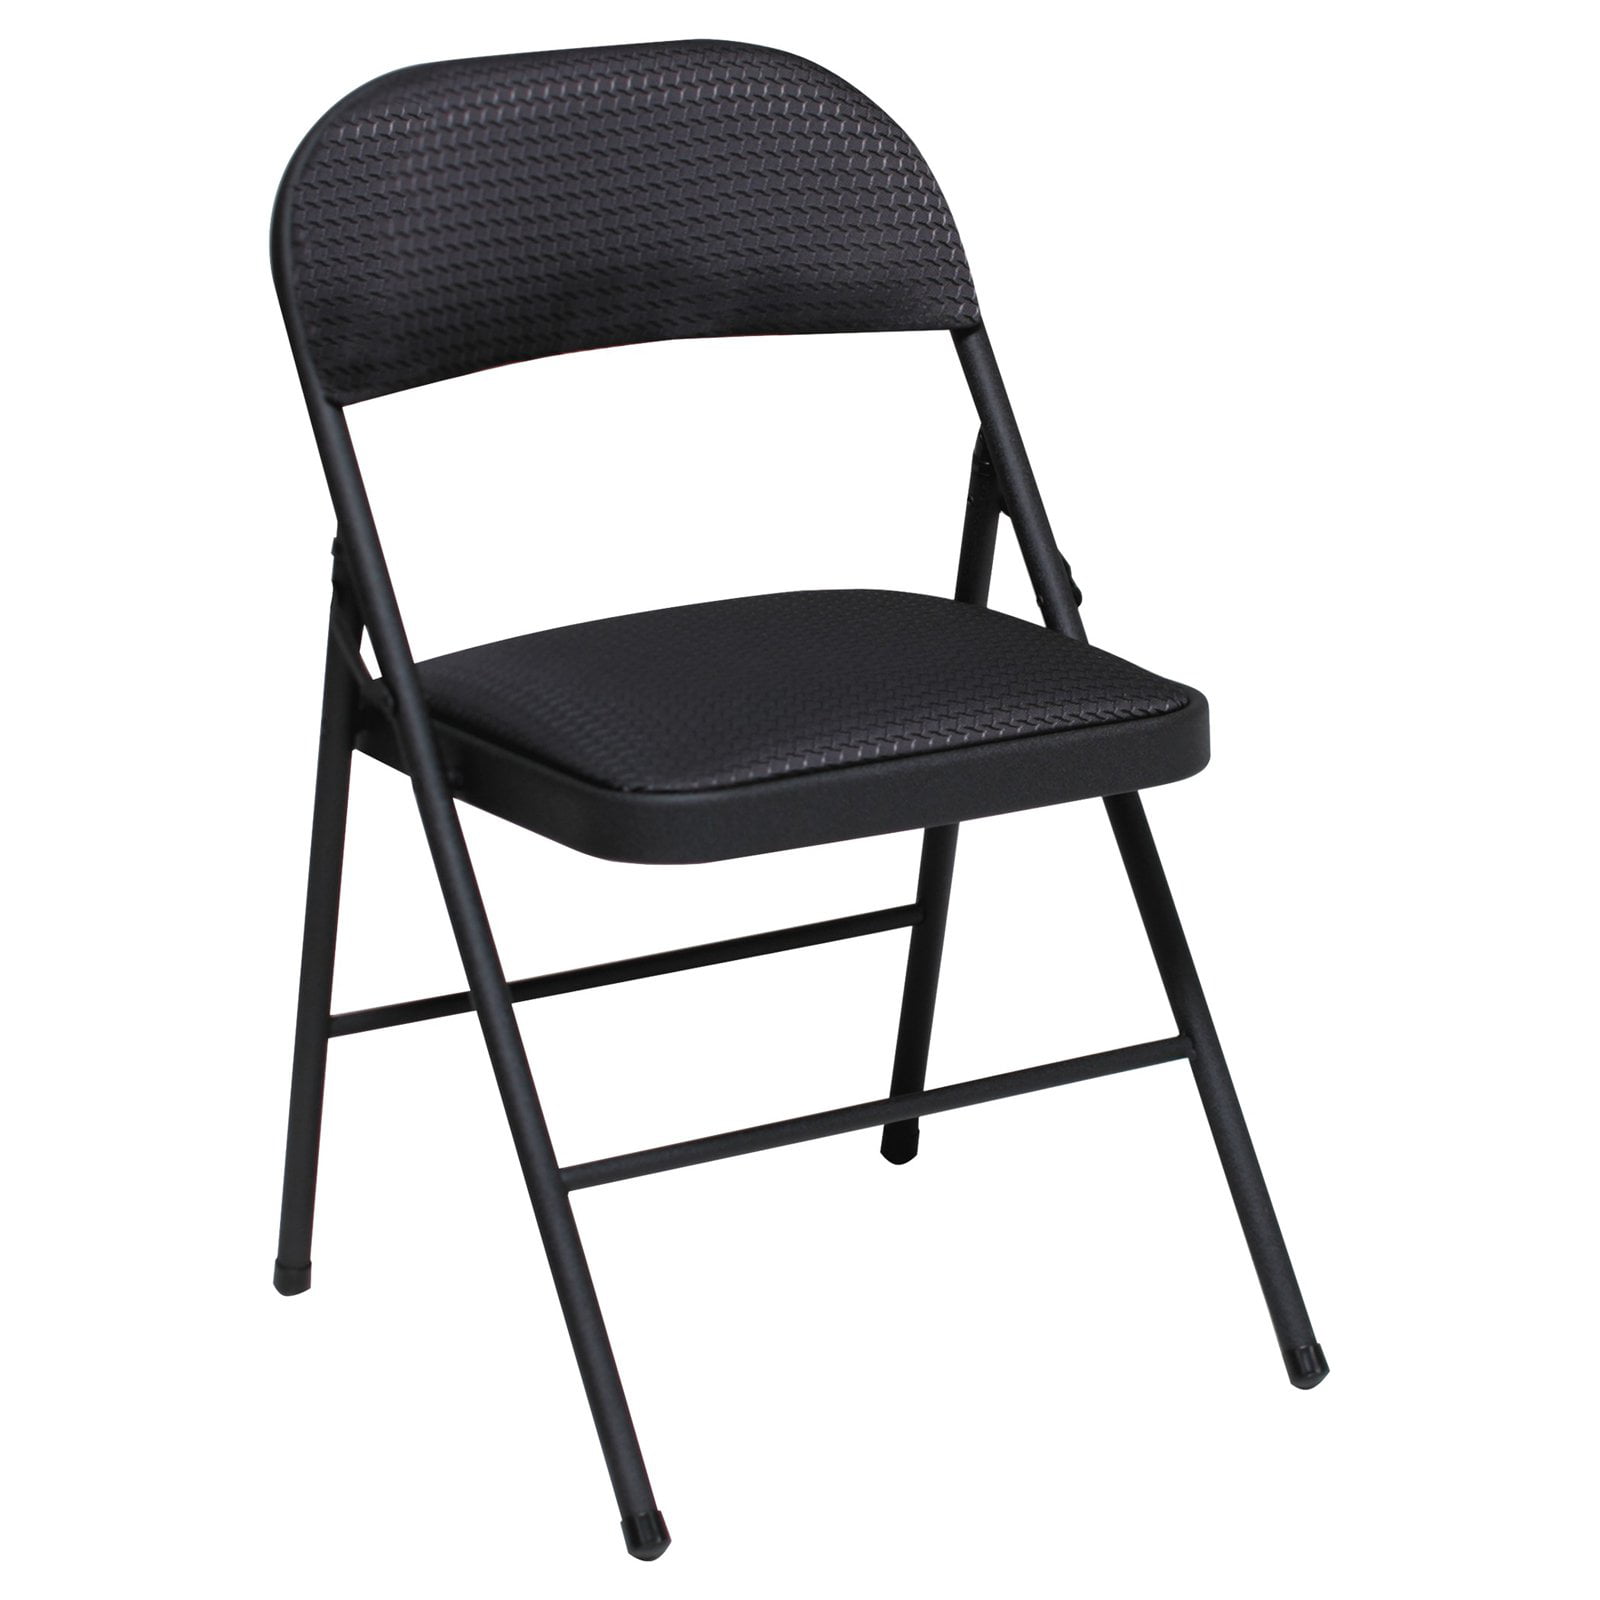  Cosco  Deluxe Metal and Fabric Folding  Chair  Set of 4 